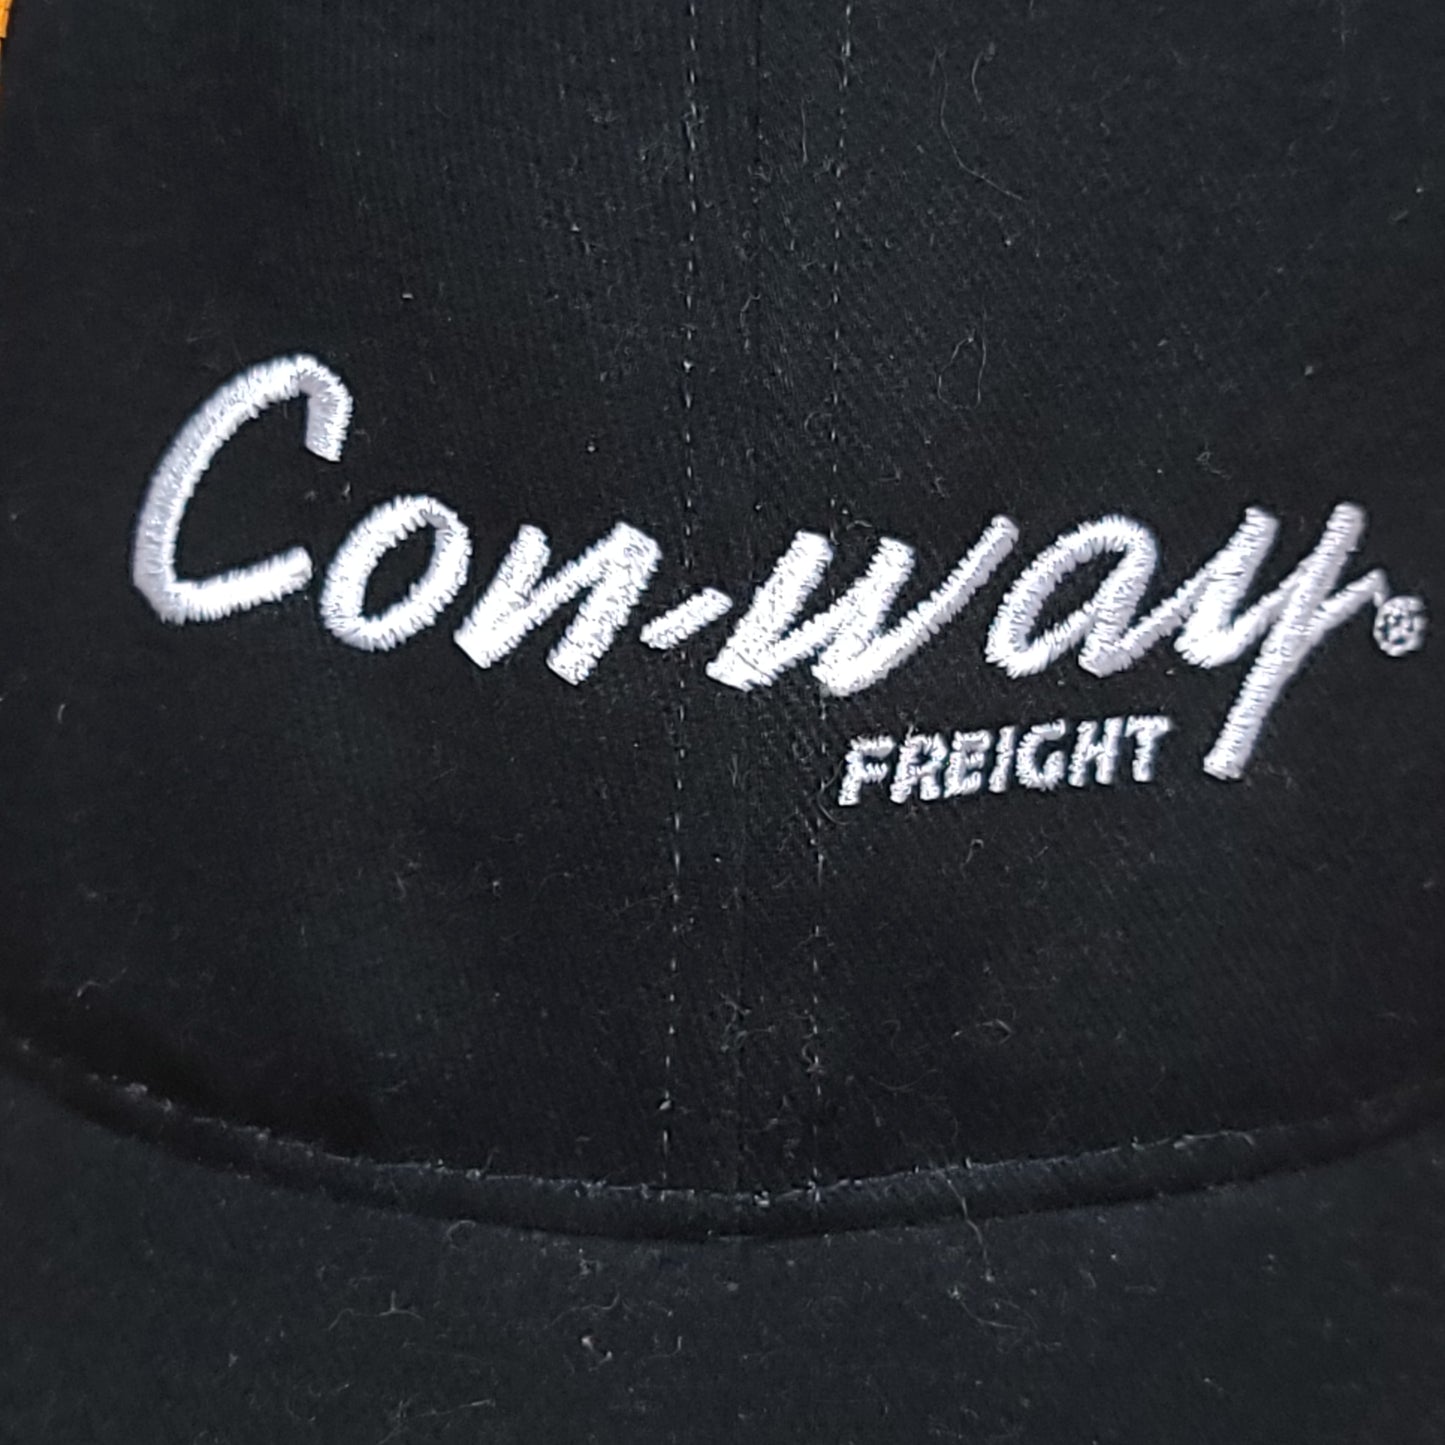 Vintage Con-way Freight Black Flame Velcro Back Hat